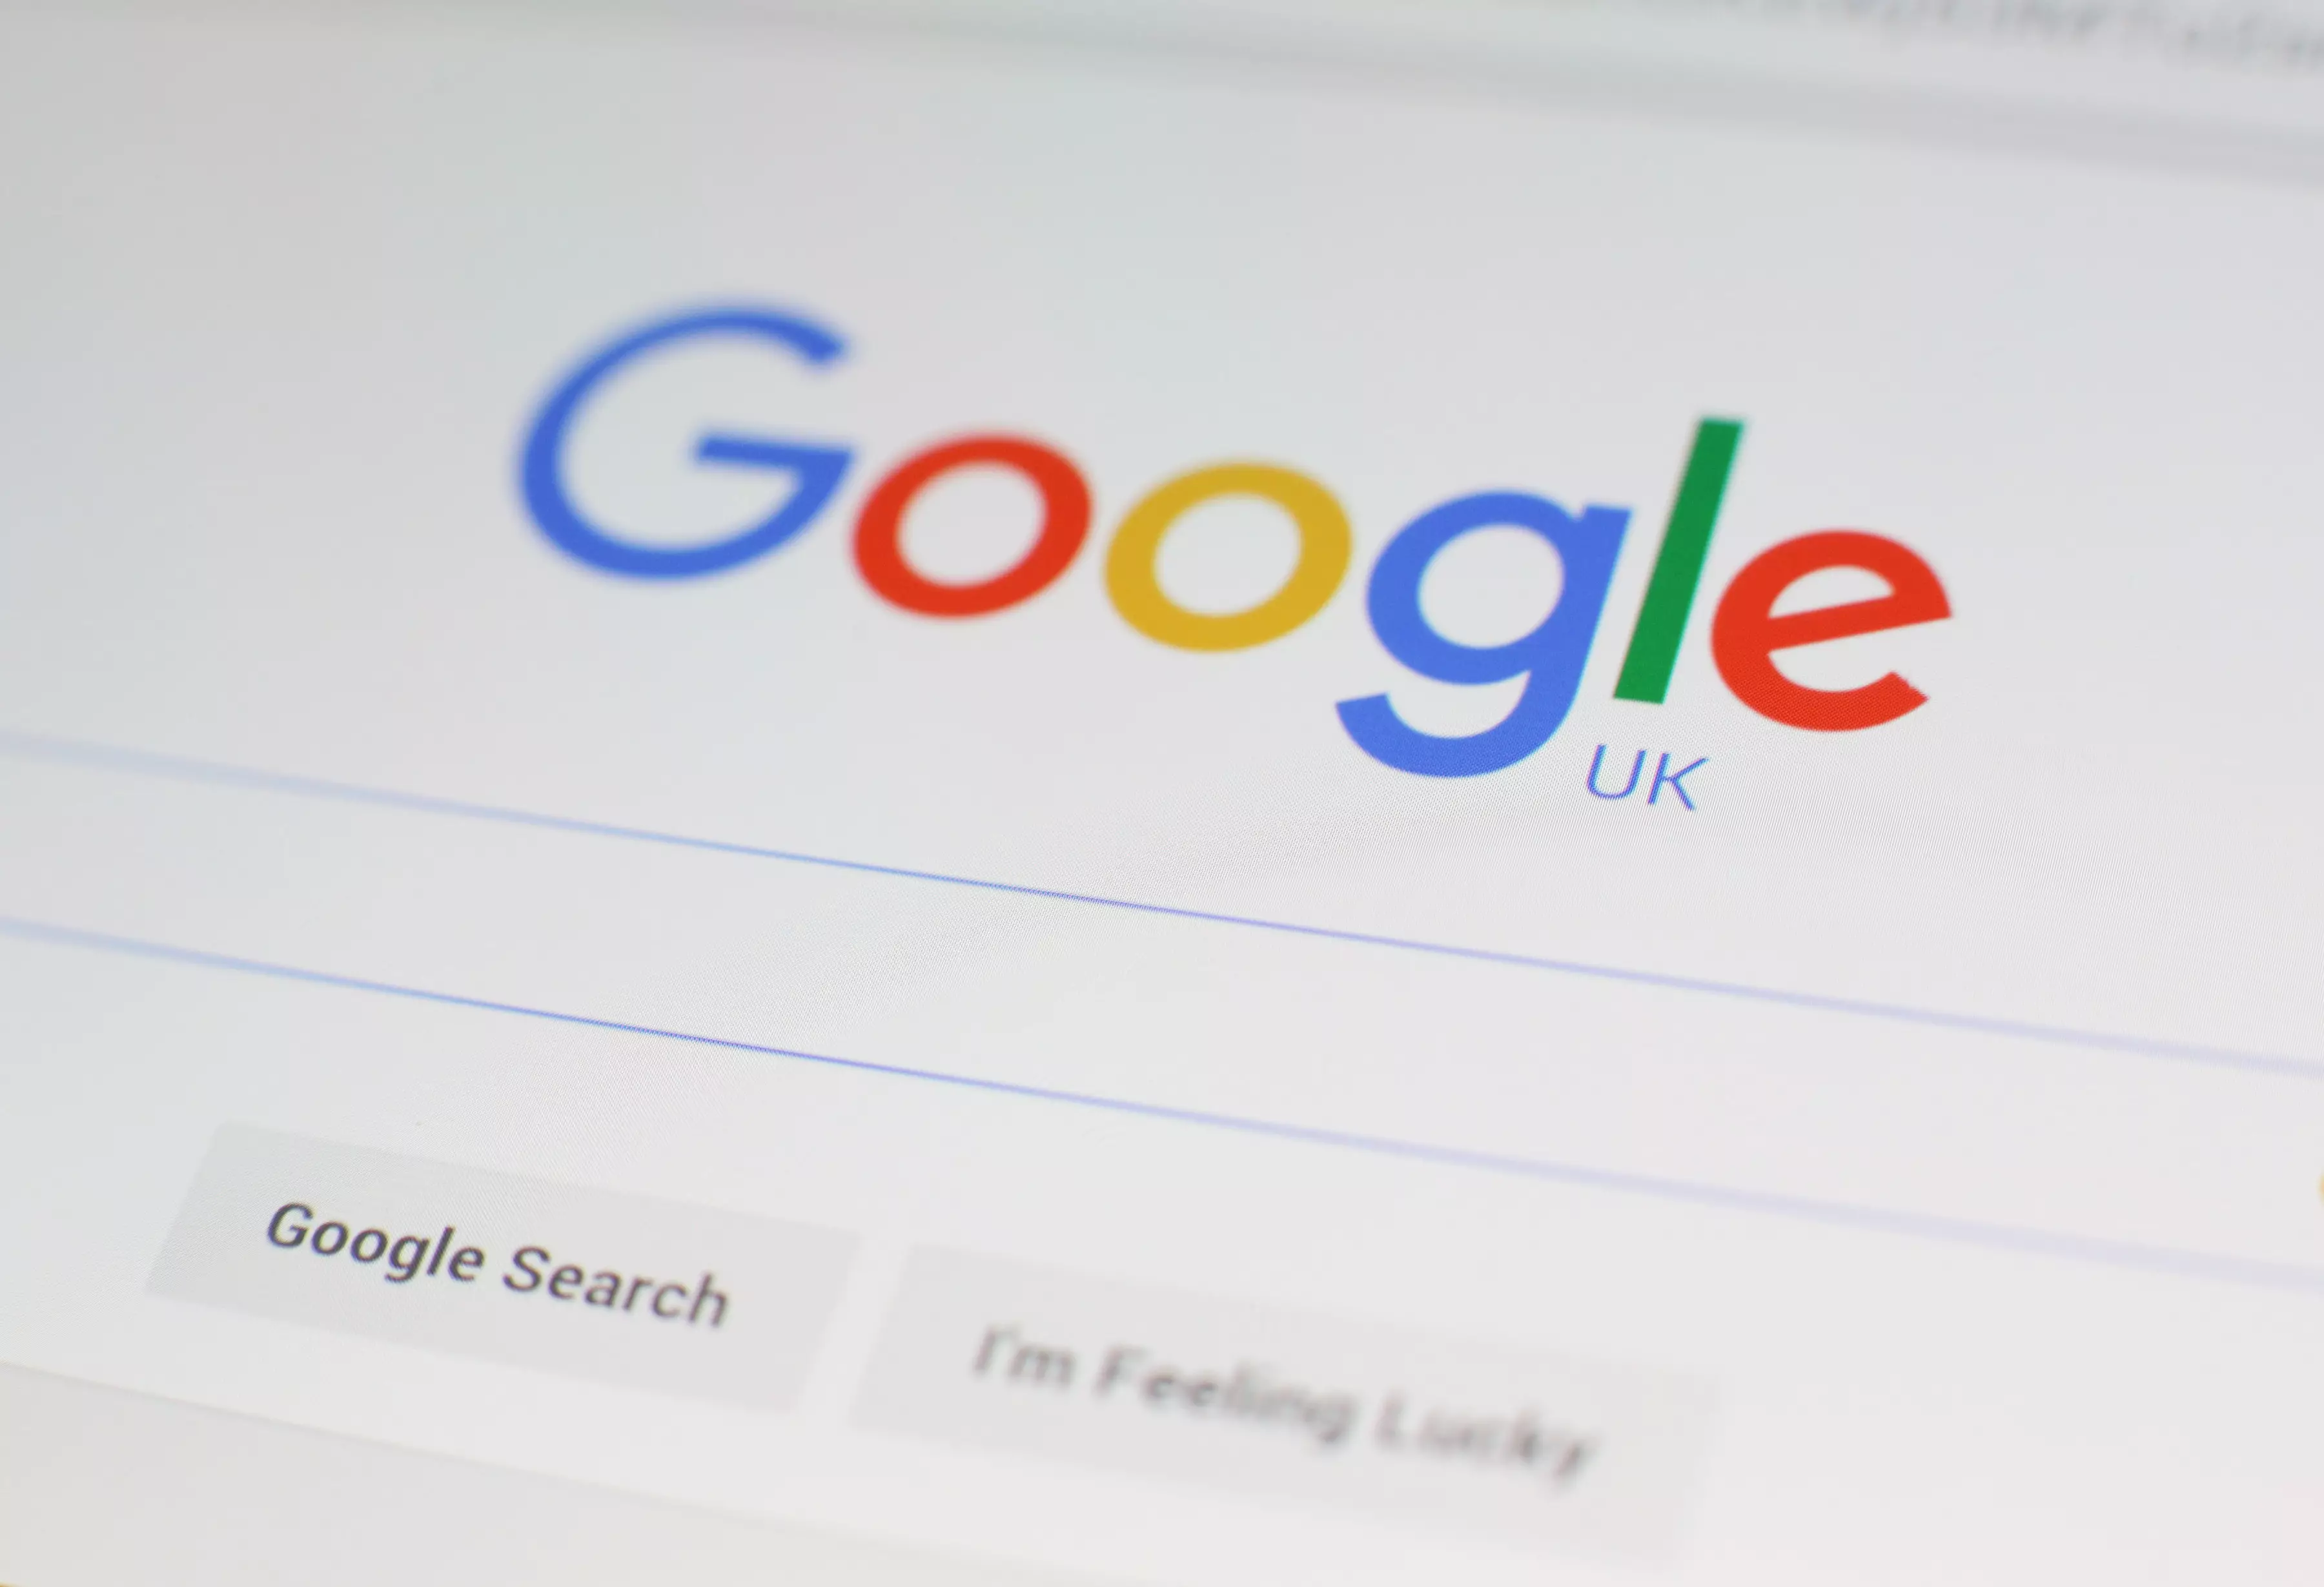 Google Are Making A Change To Their Website And Users Aren't Too Happy With It